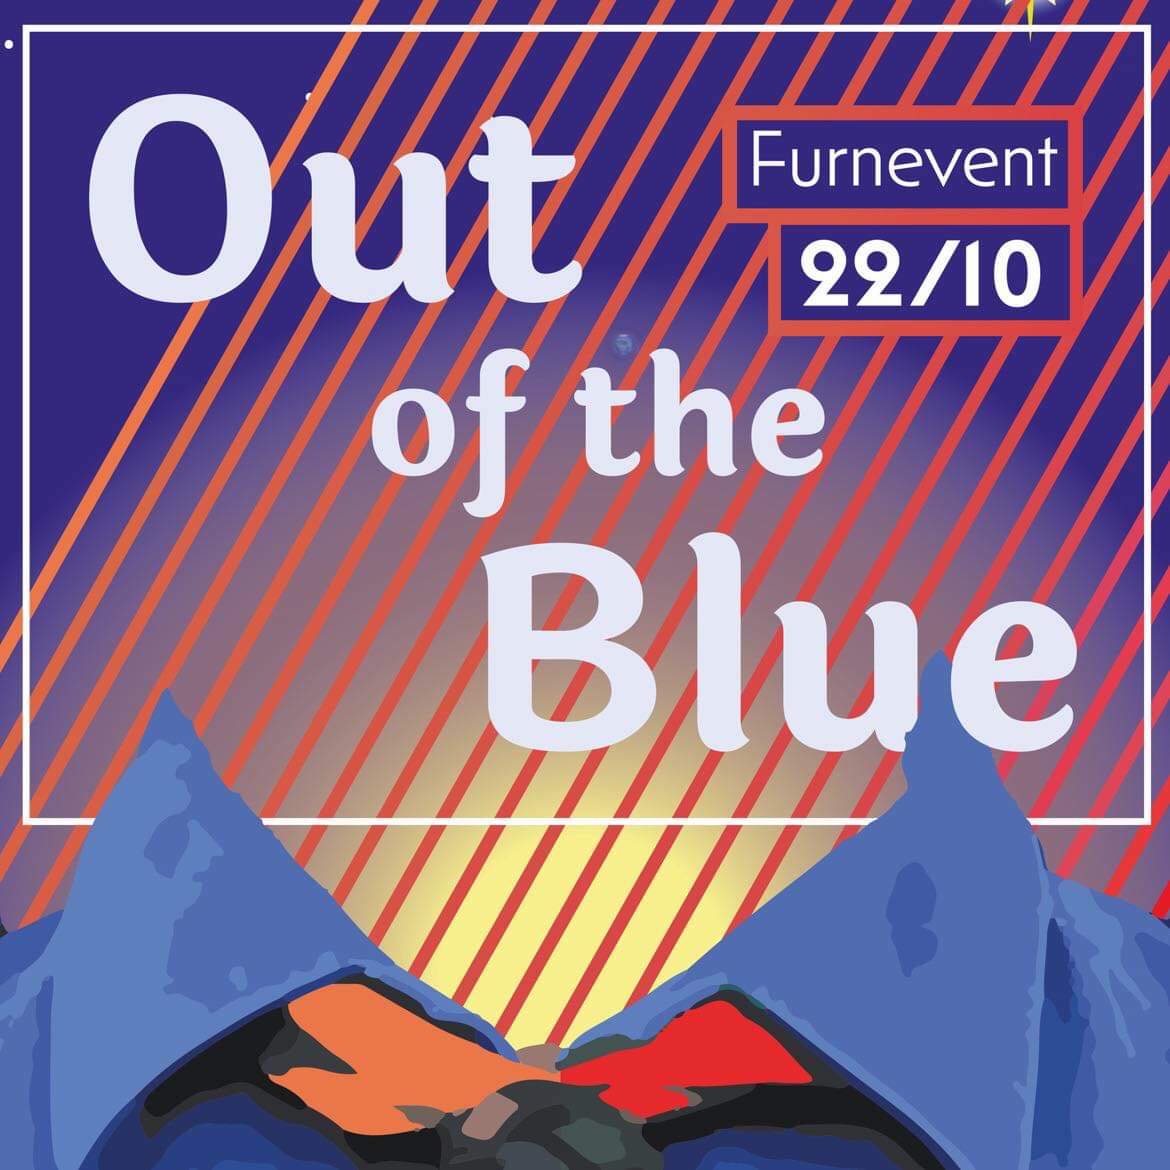 fuif: out of the blue 22/10